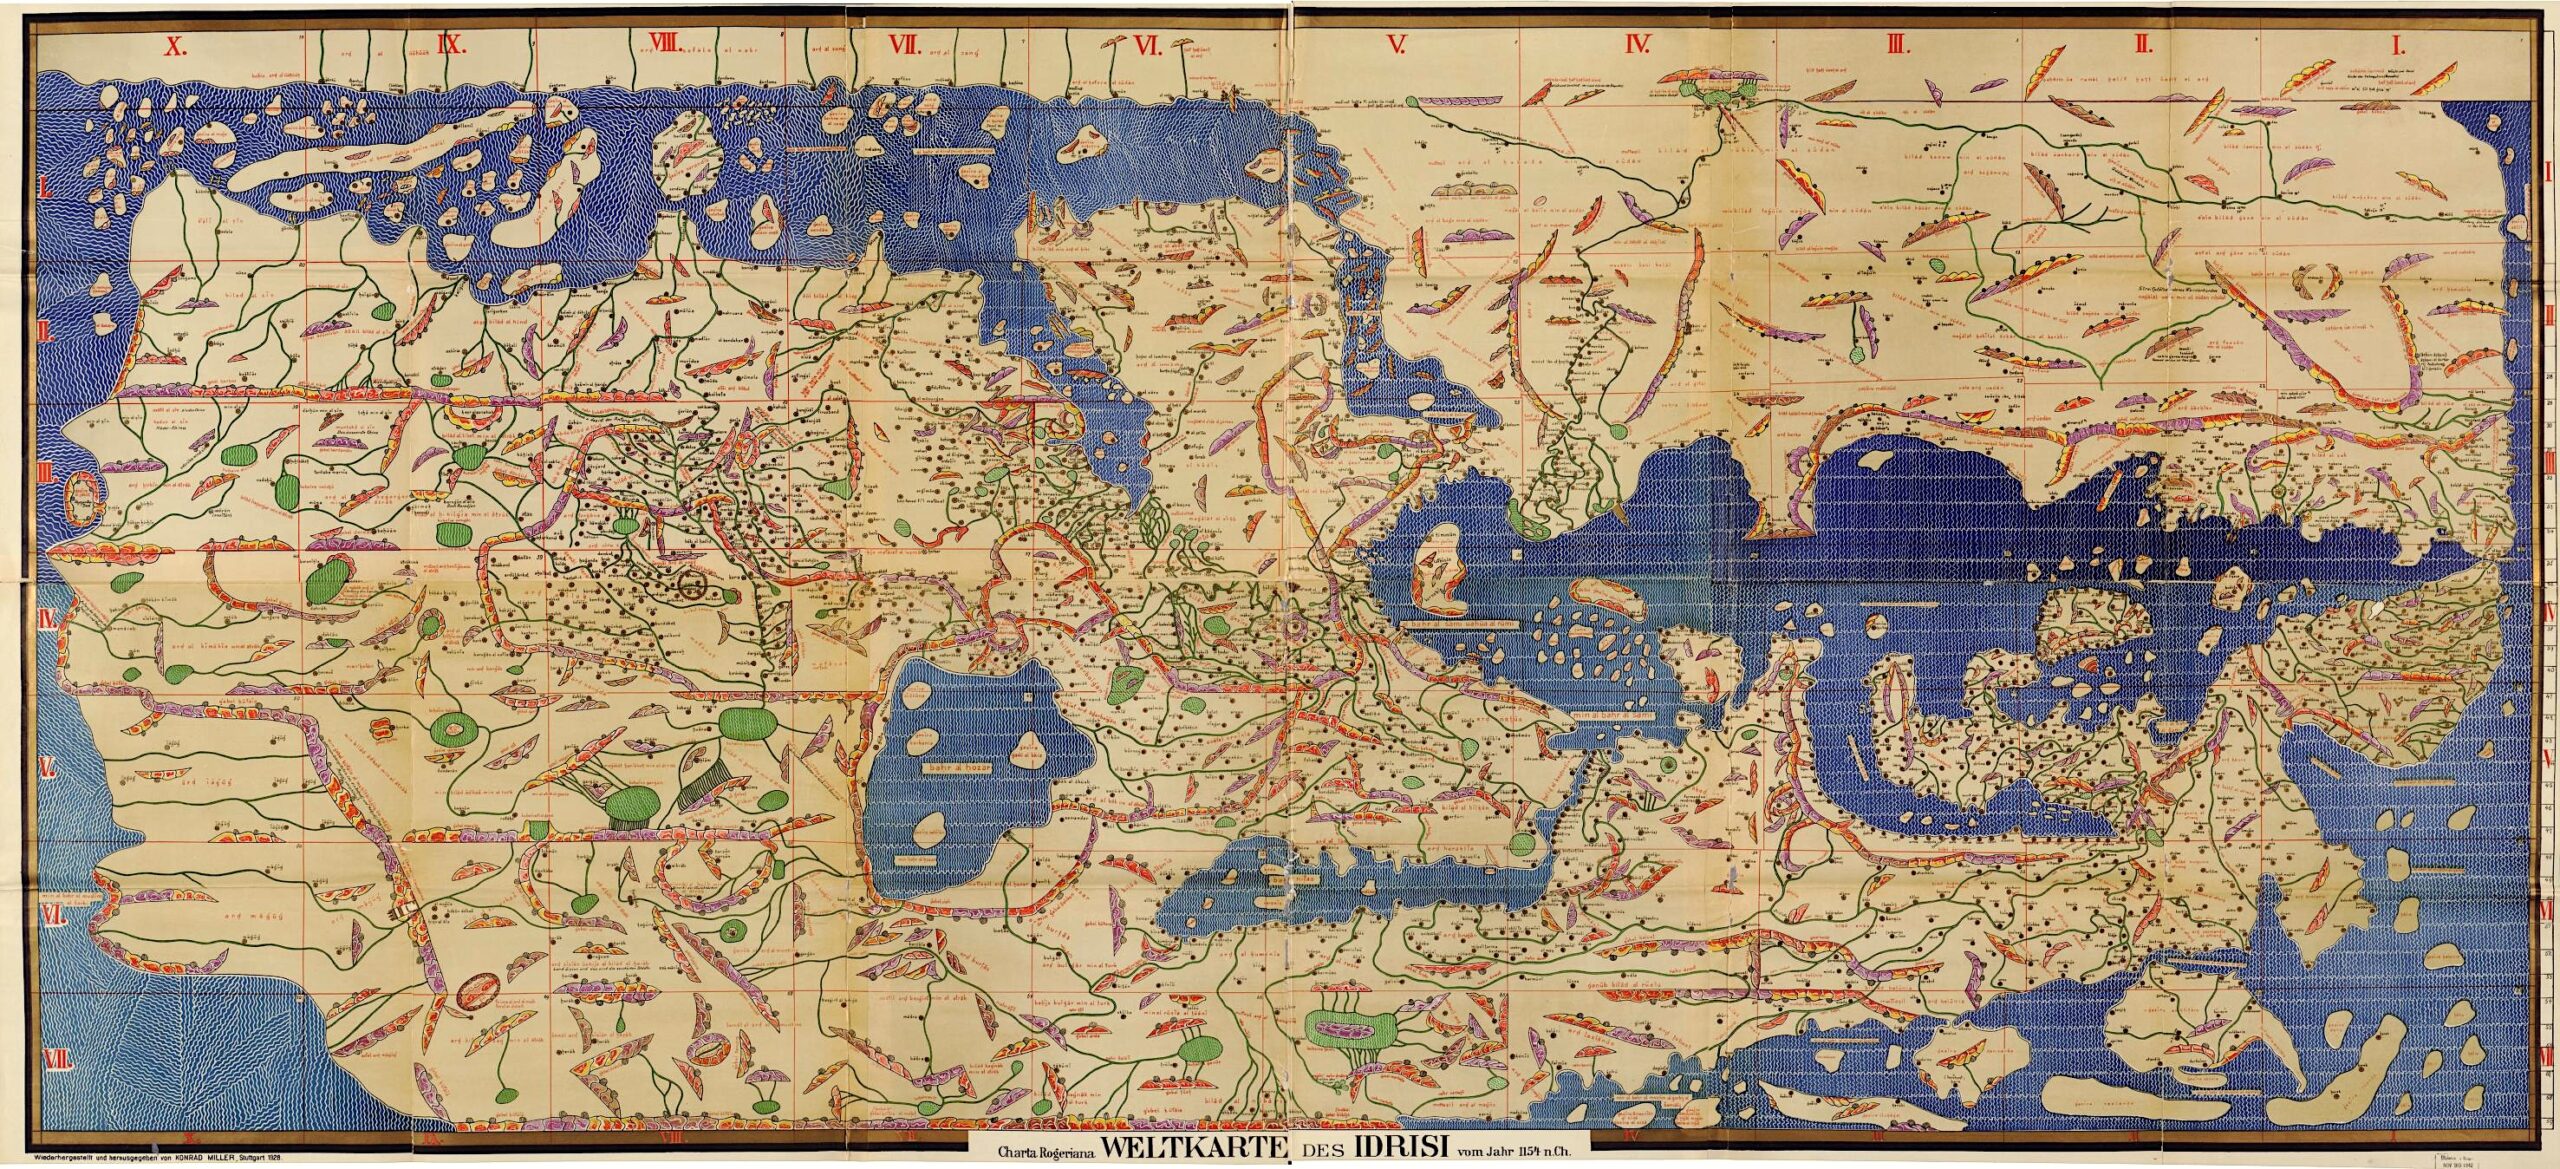 The Global Map That Offered Medical Mapmaking to the Medieval Islamic Global (1154 AD)